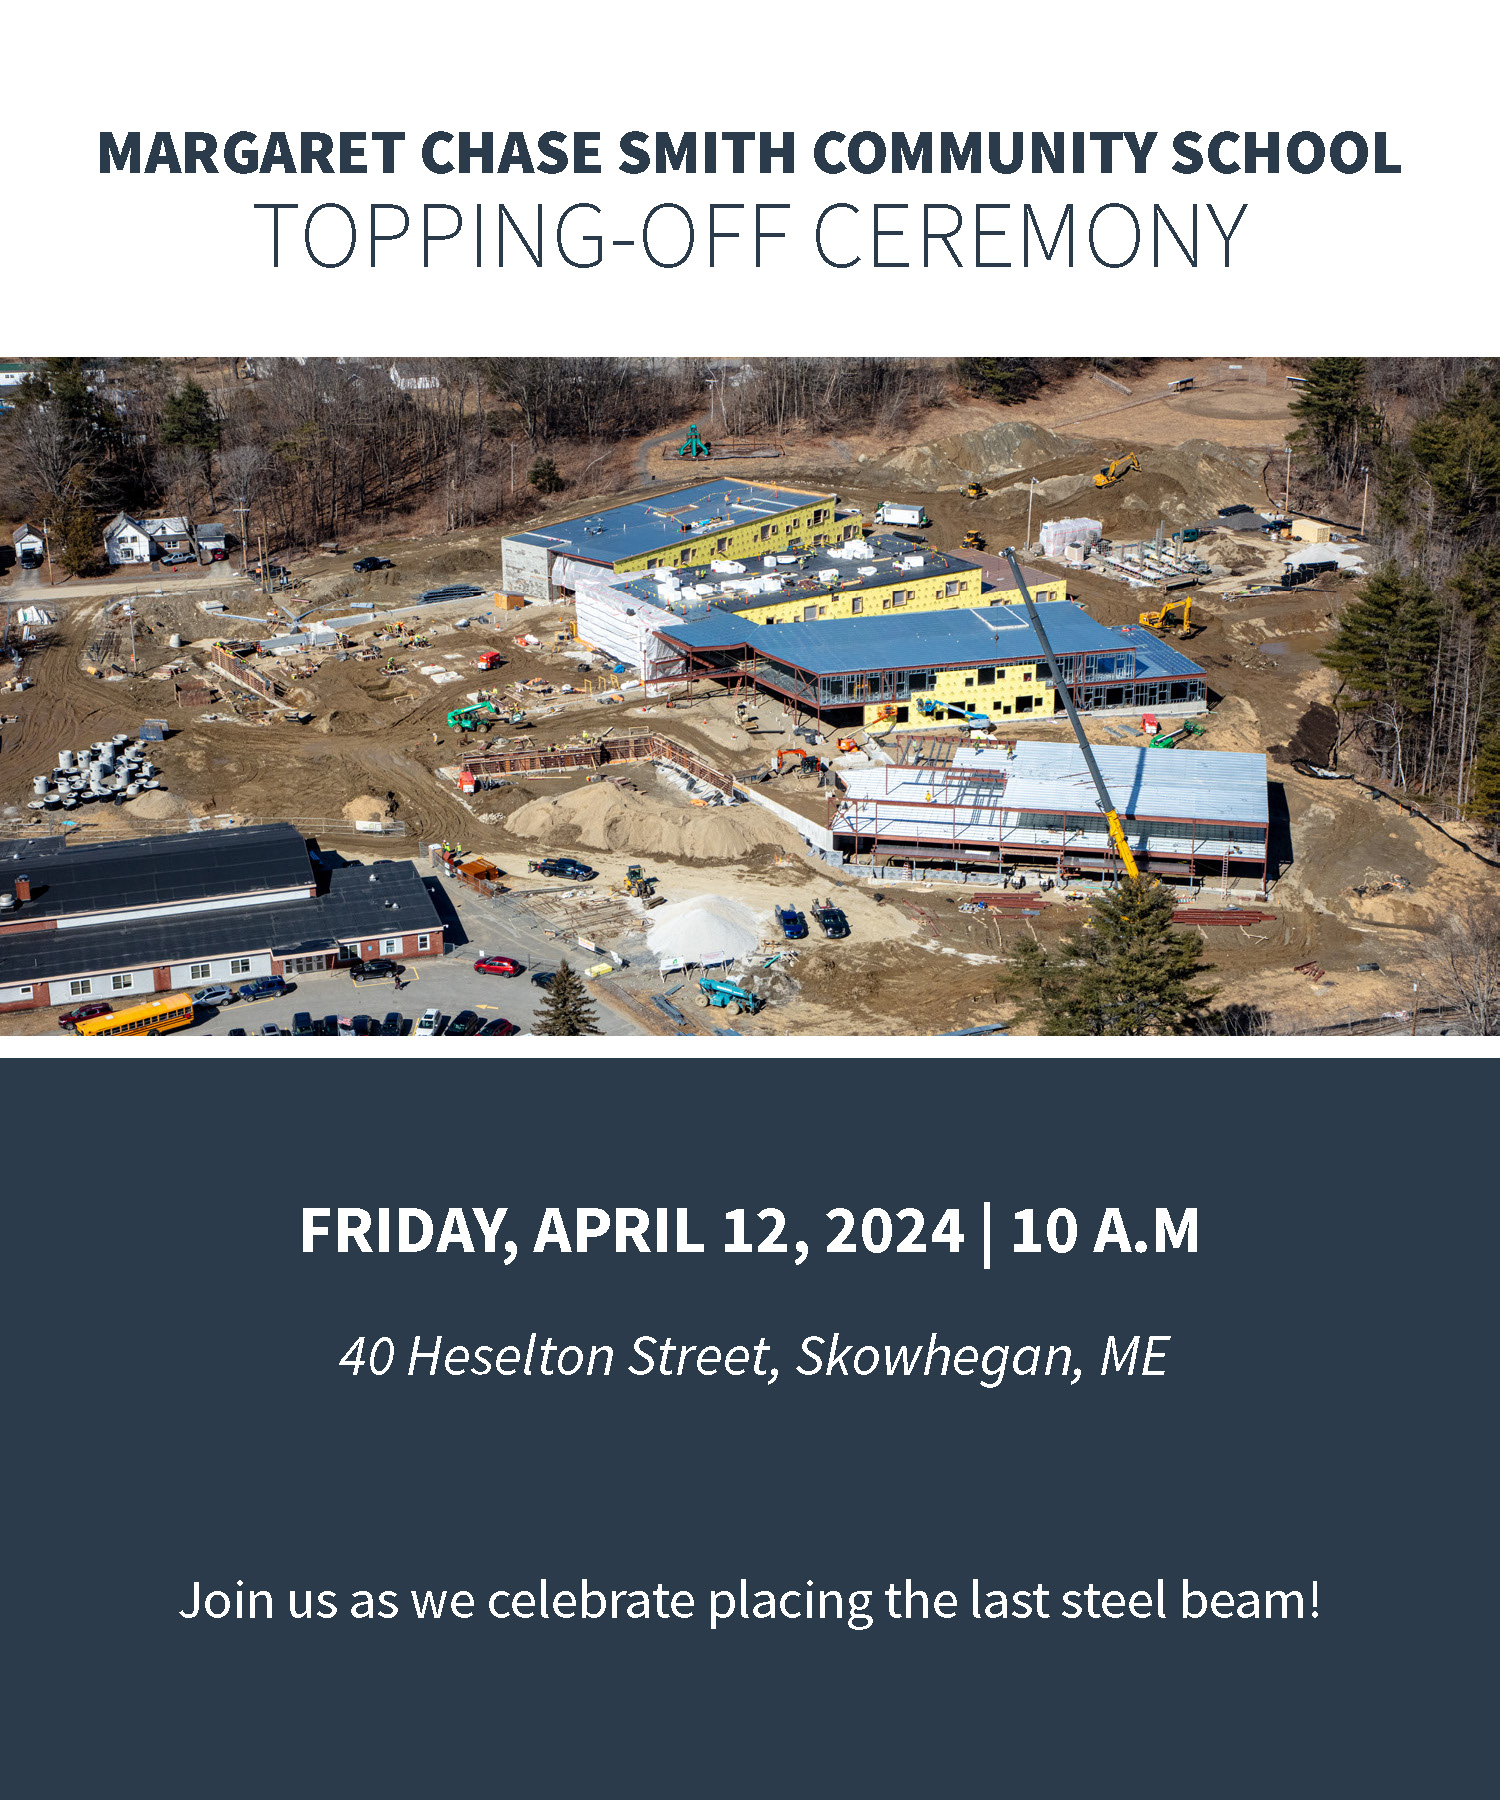 Topping-Off ceremony